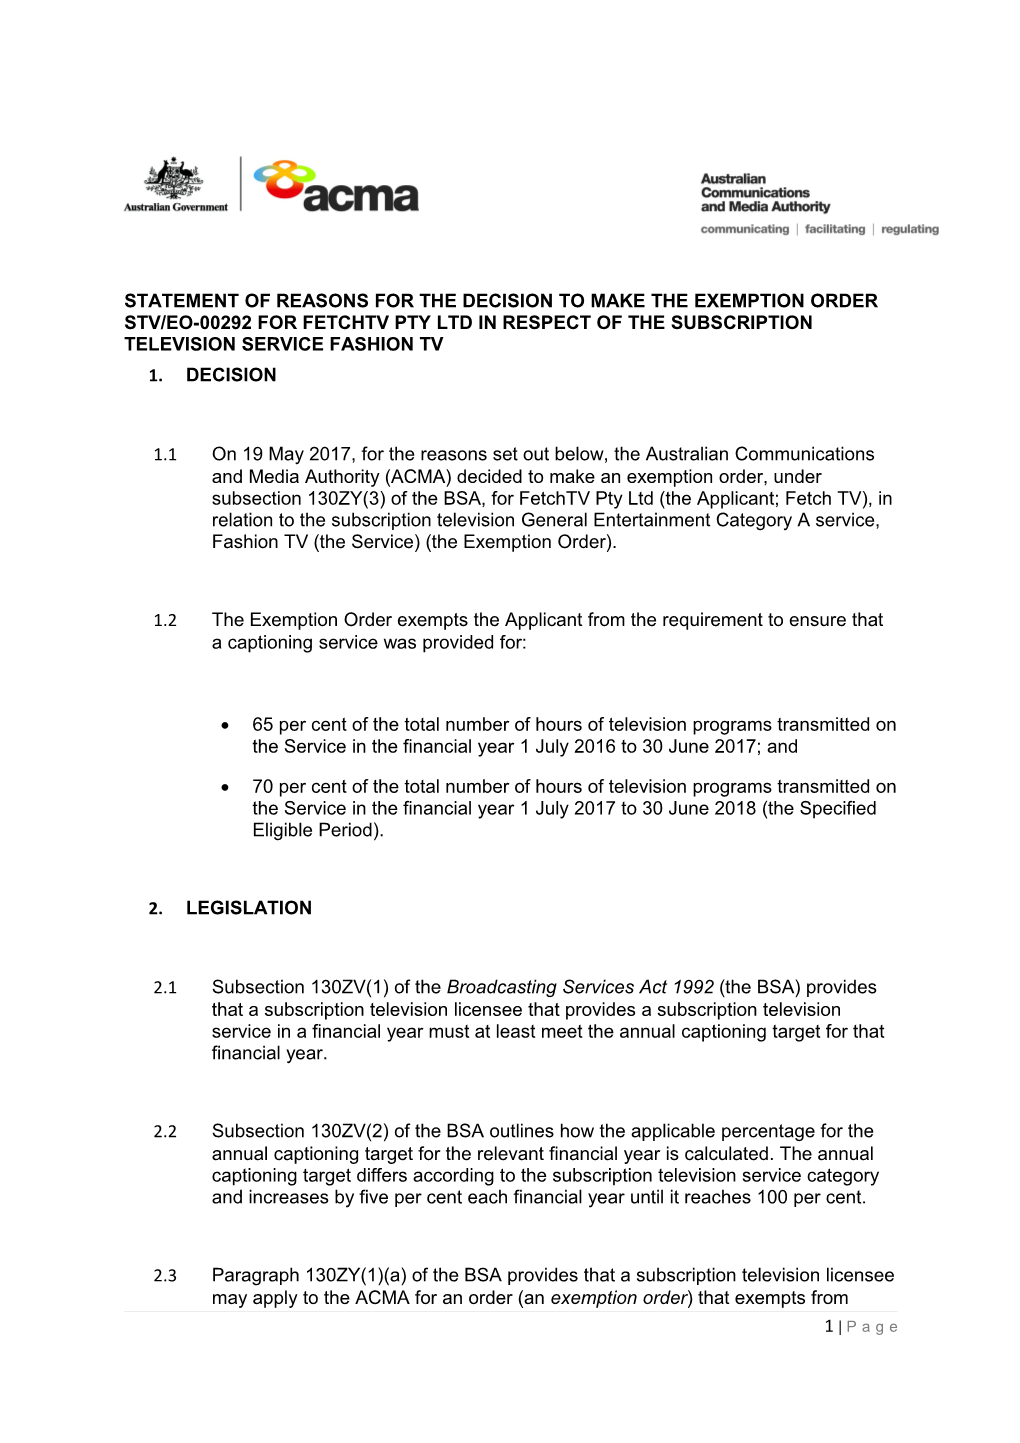 Statement of Reasons for the Decision to Make the Exemption Order Stv/Eo-00292For Fetchtv